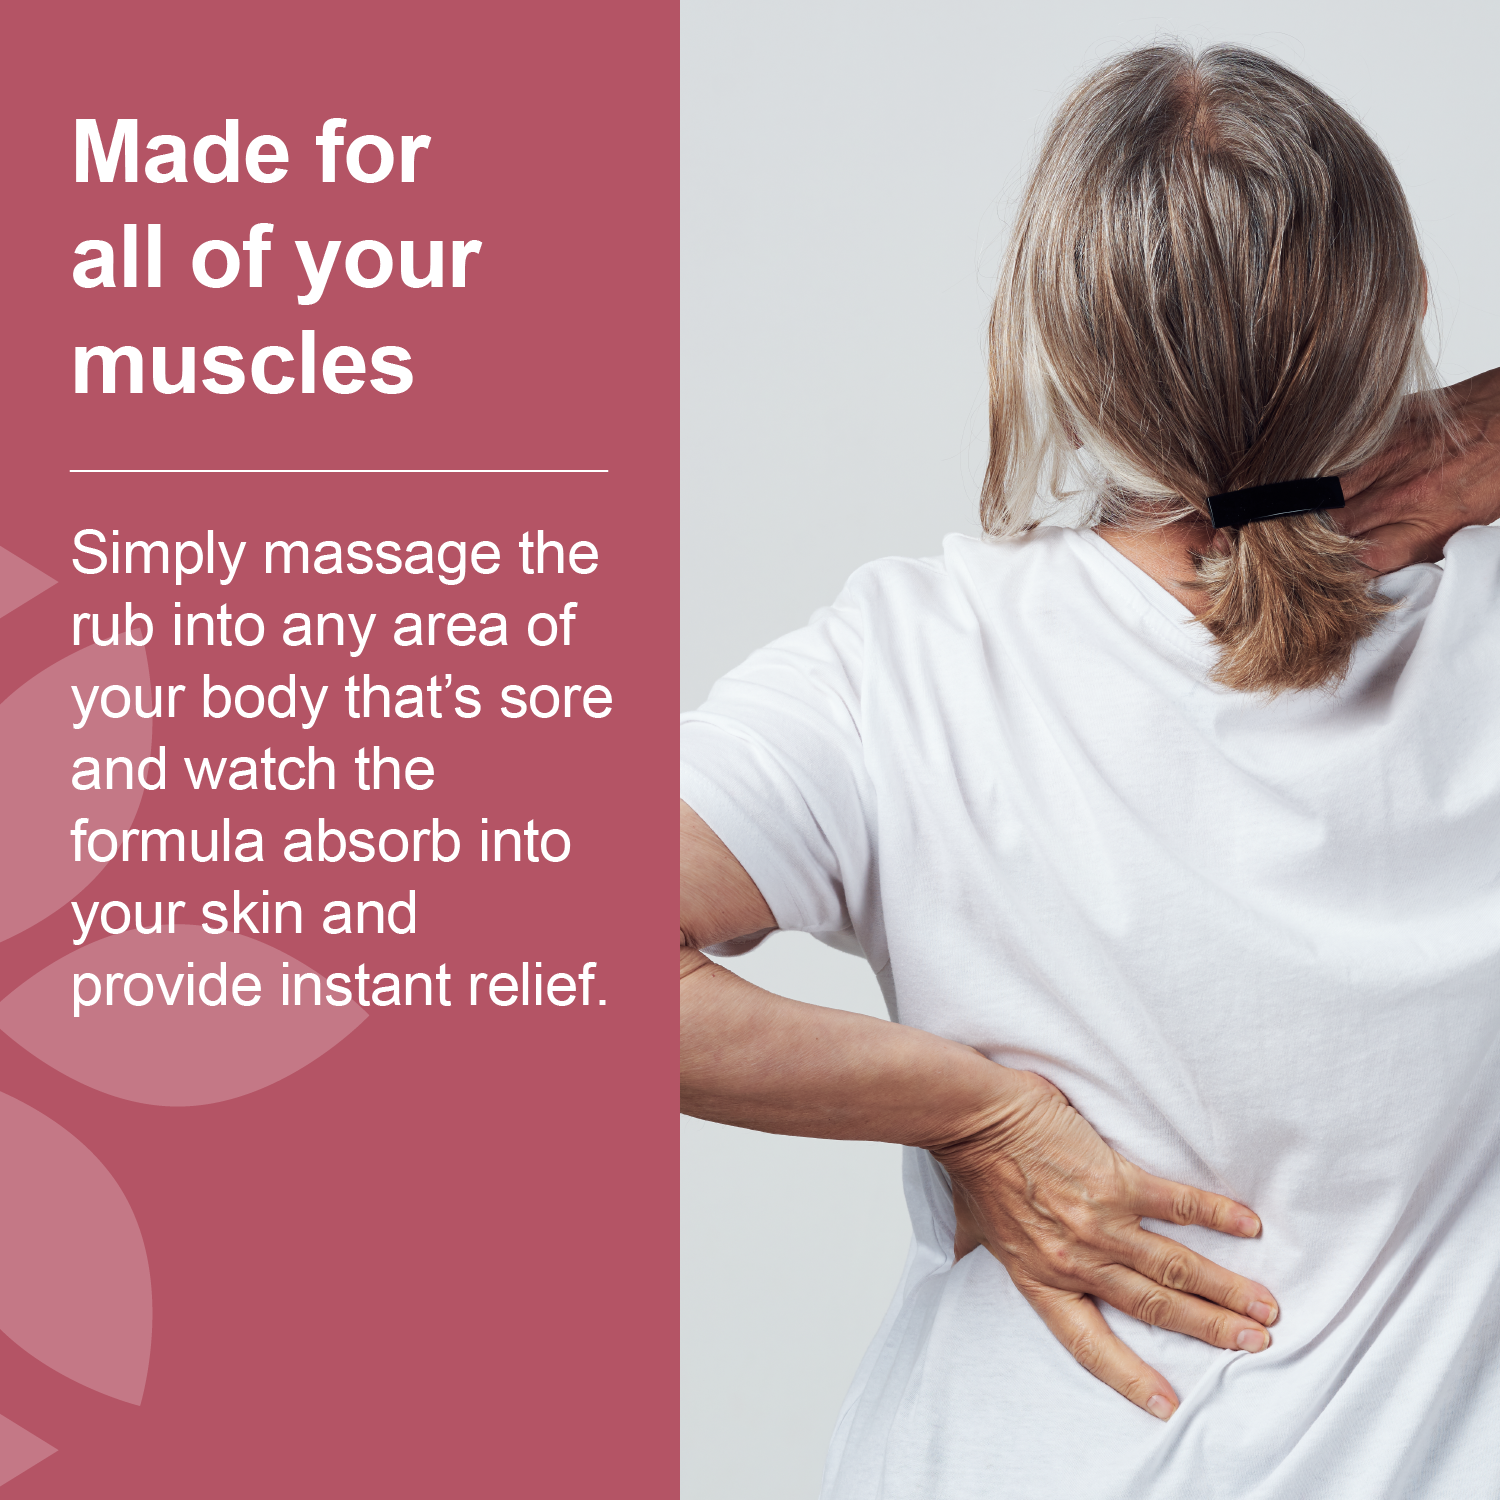 Simply massage into any area of your body that's sore